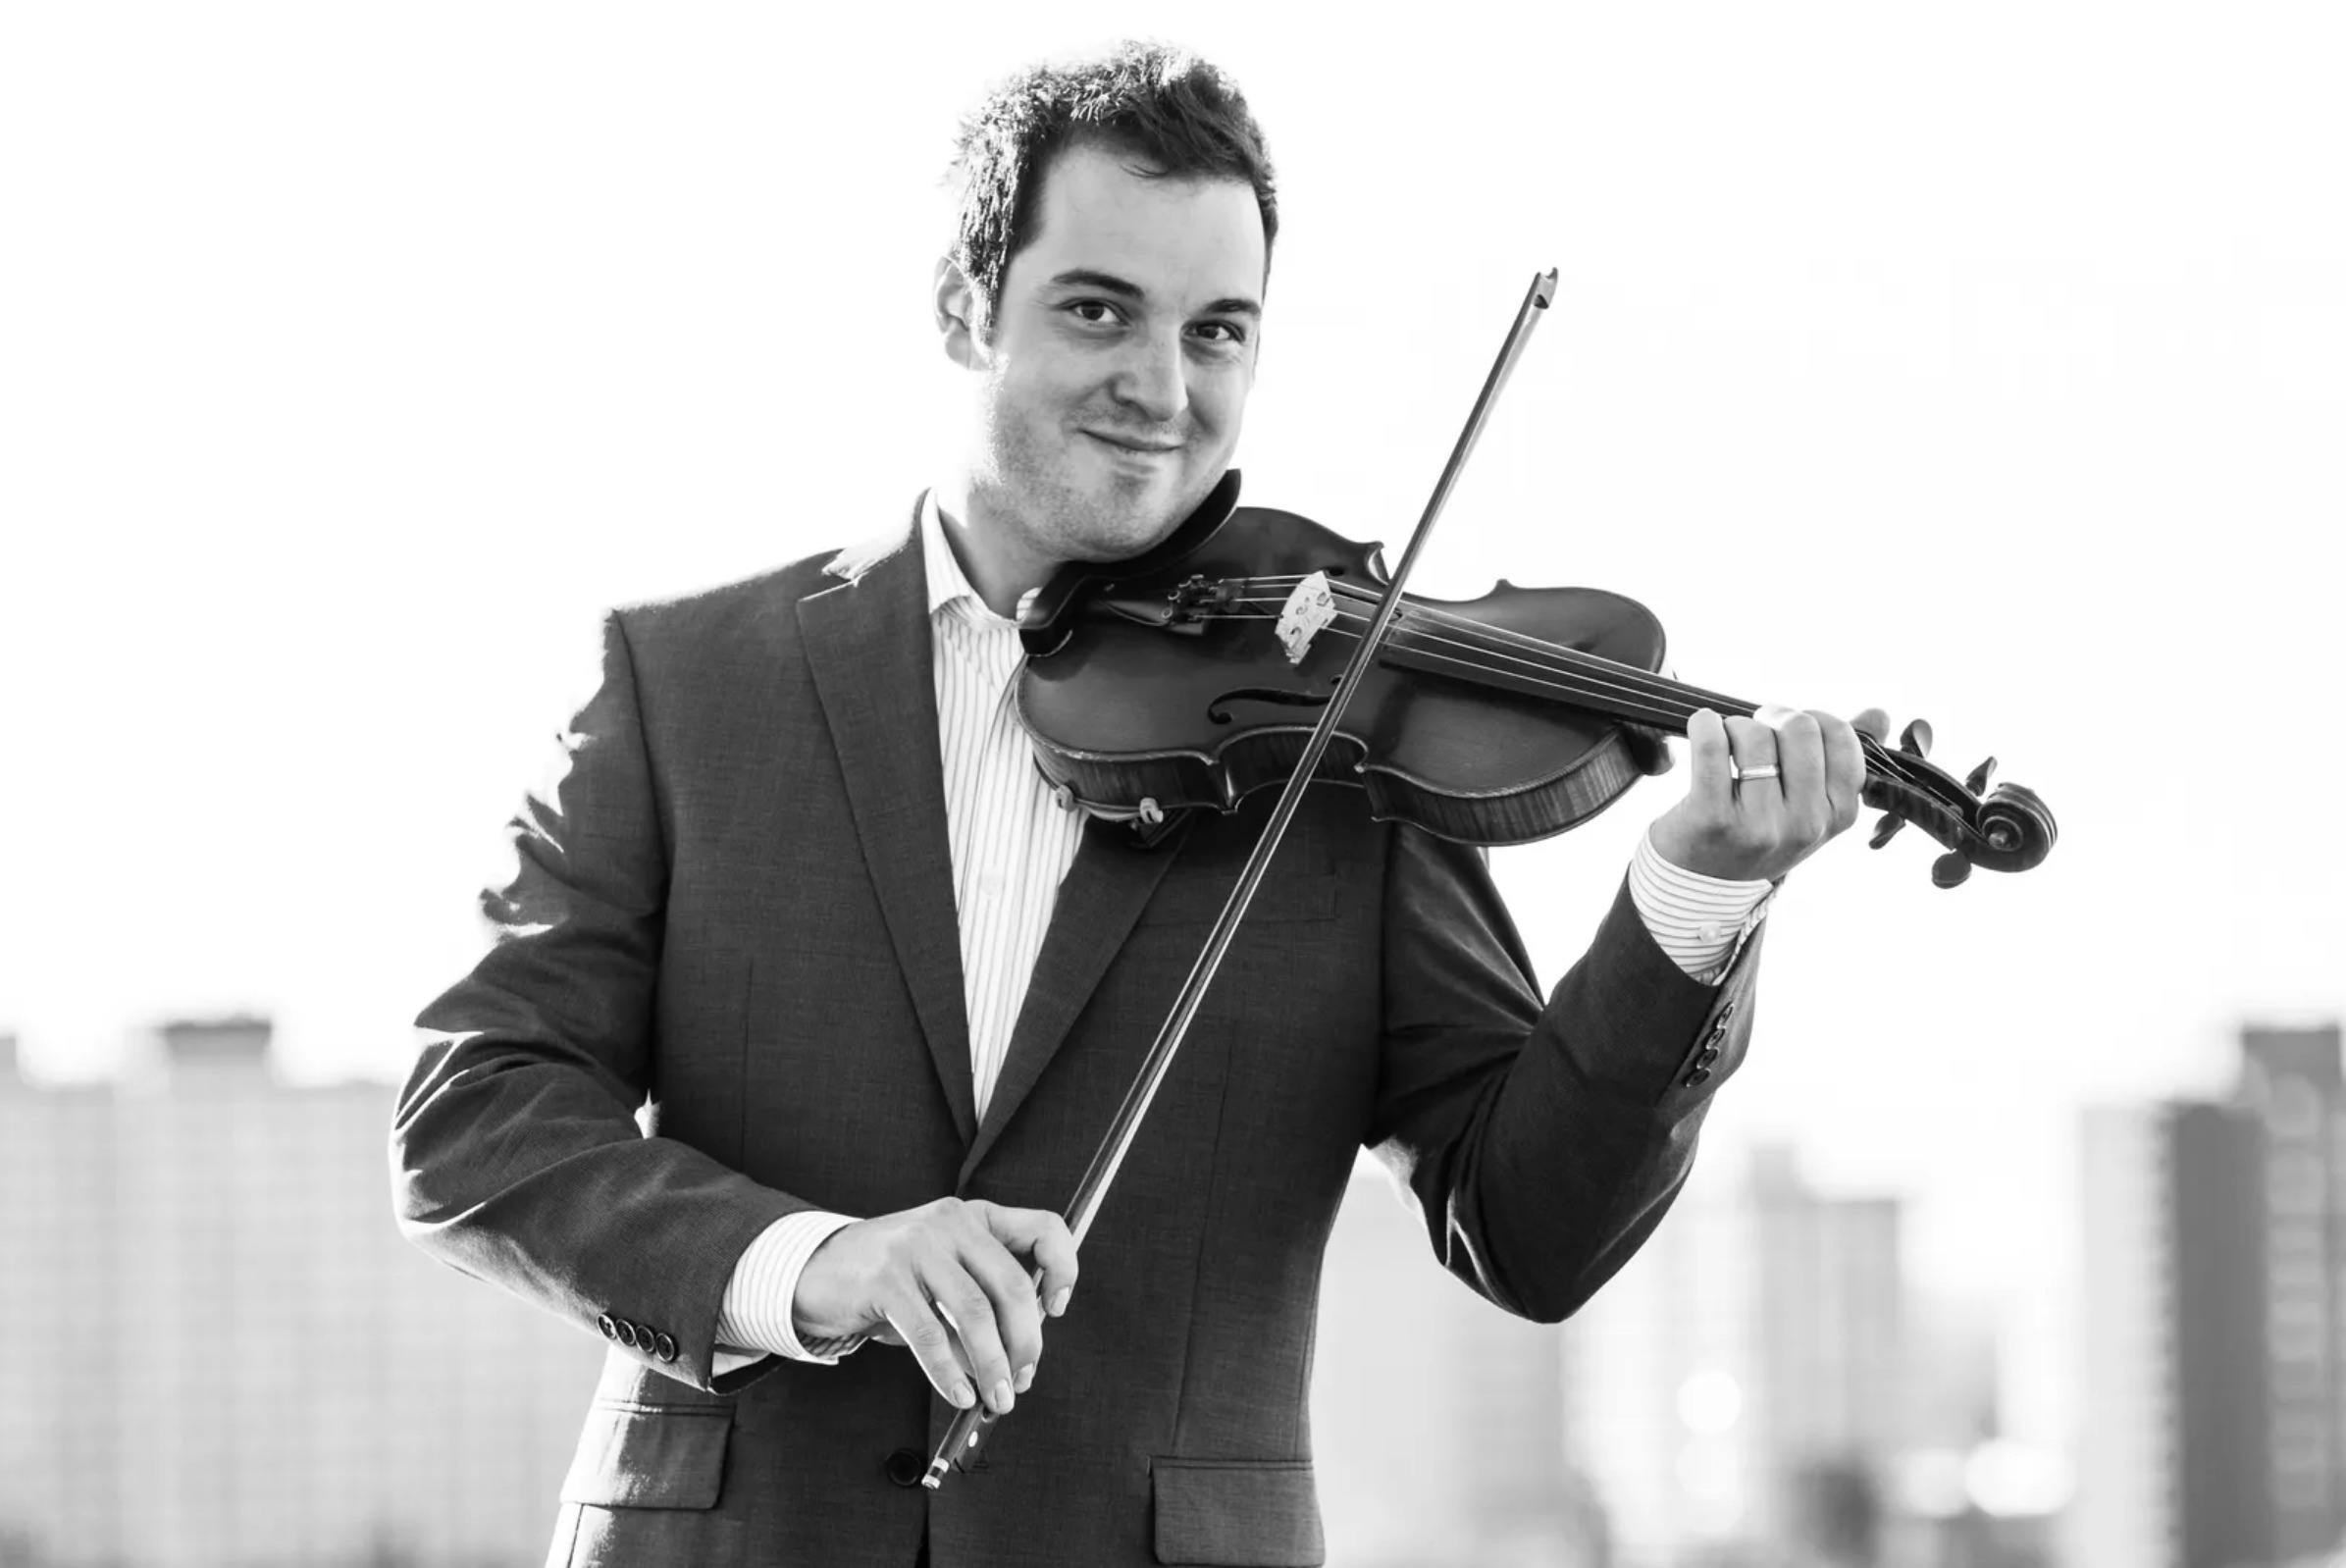 Black and white photo shows Daniel Gervais looking at the camera, standing in a suit-jacket, striped collared shirt, and playing a violin.